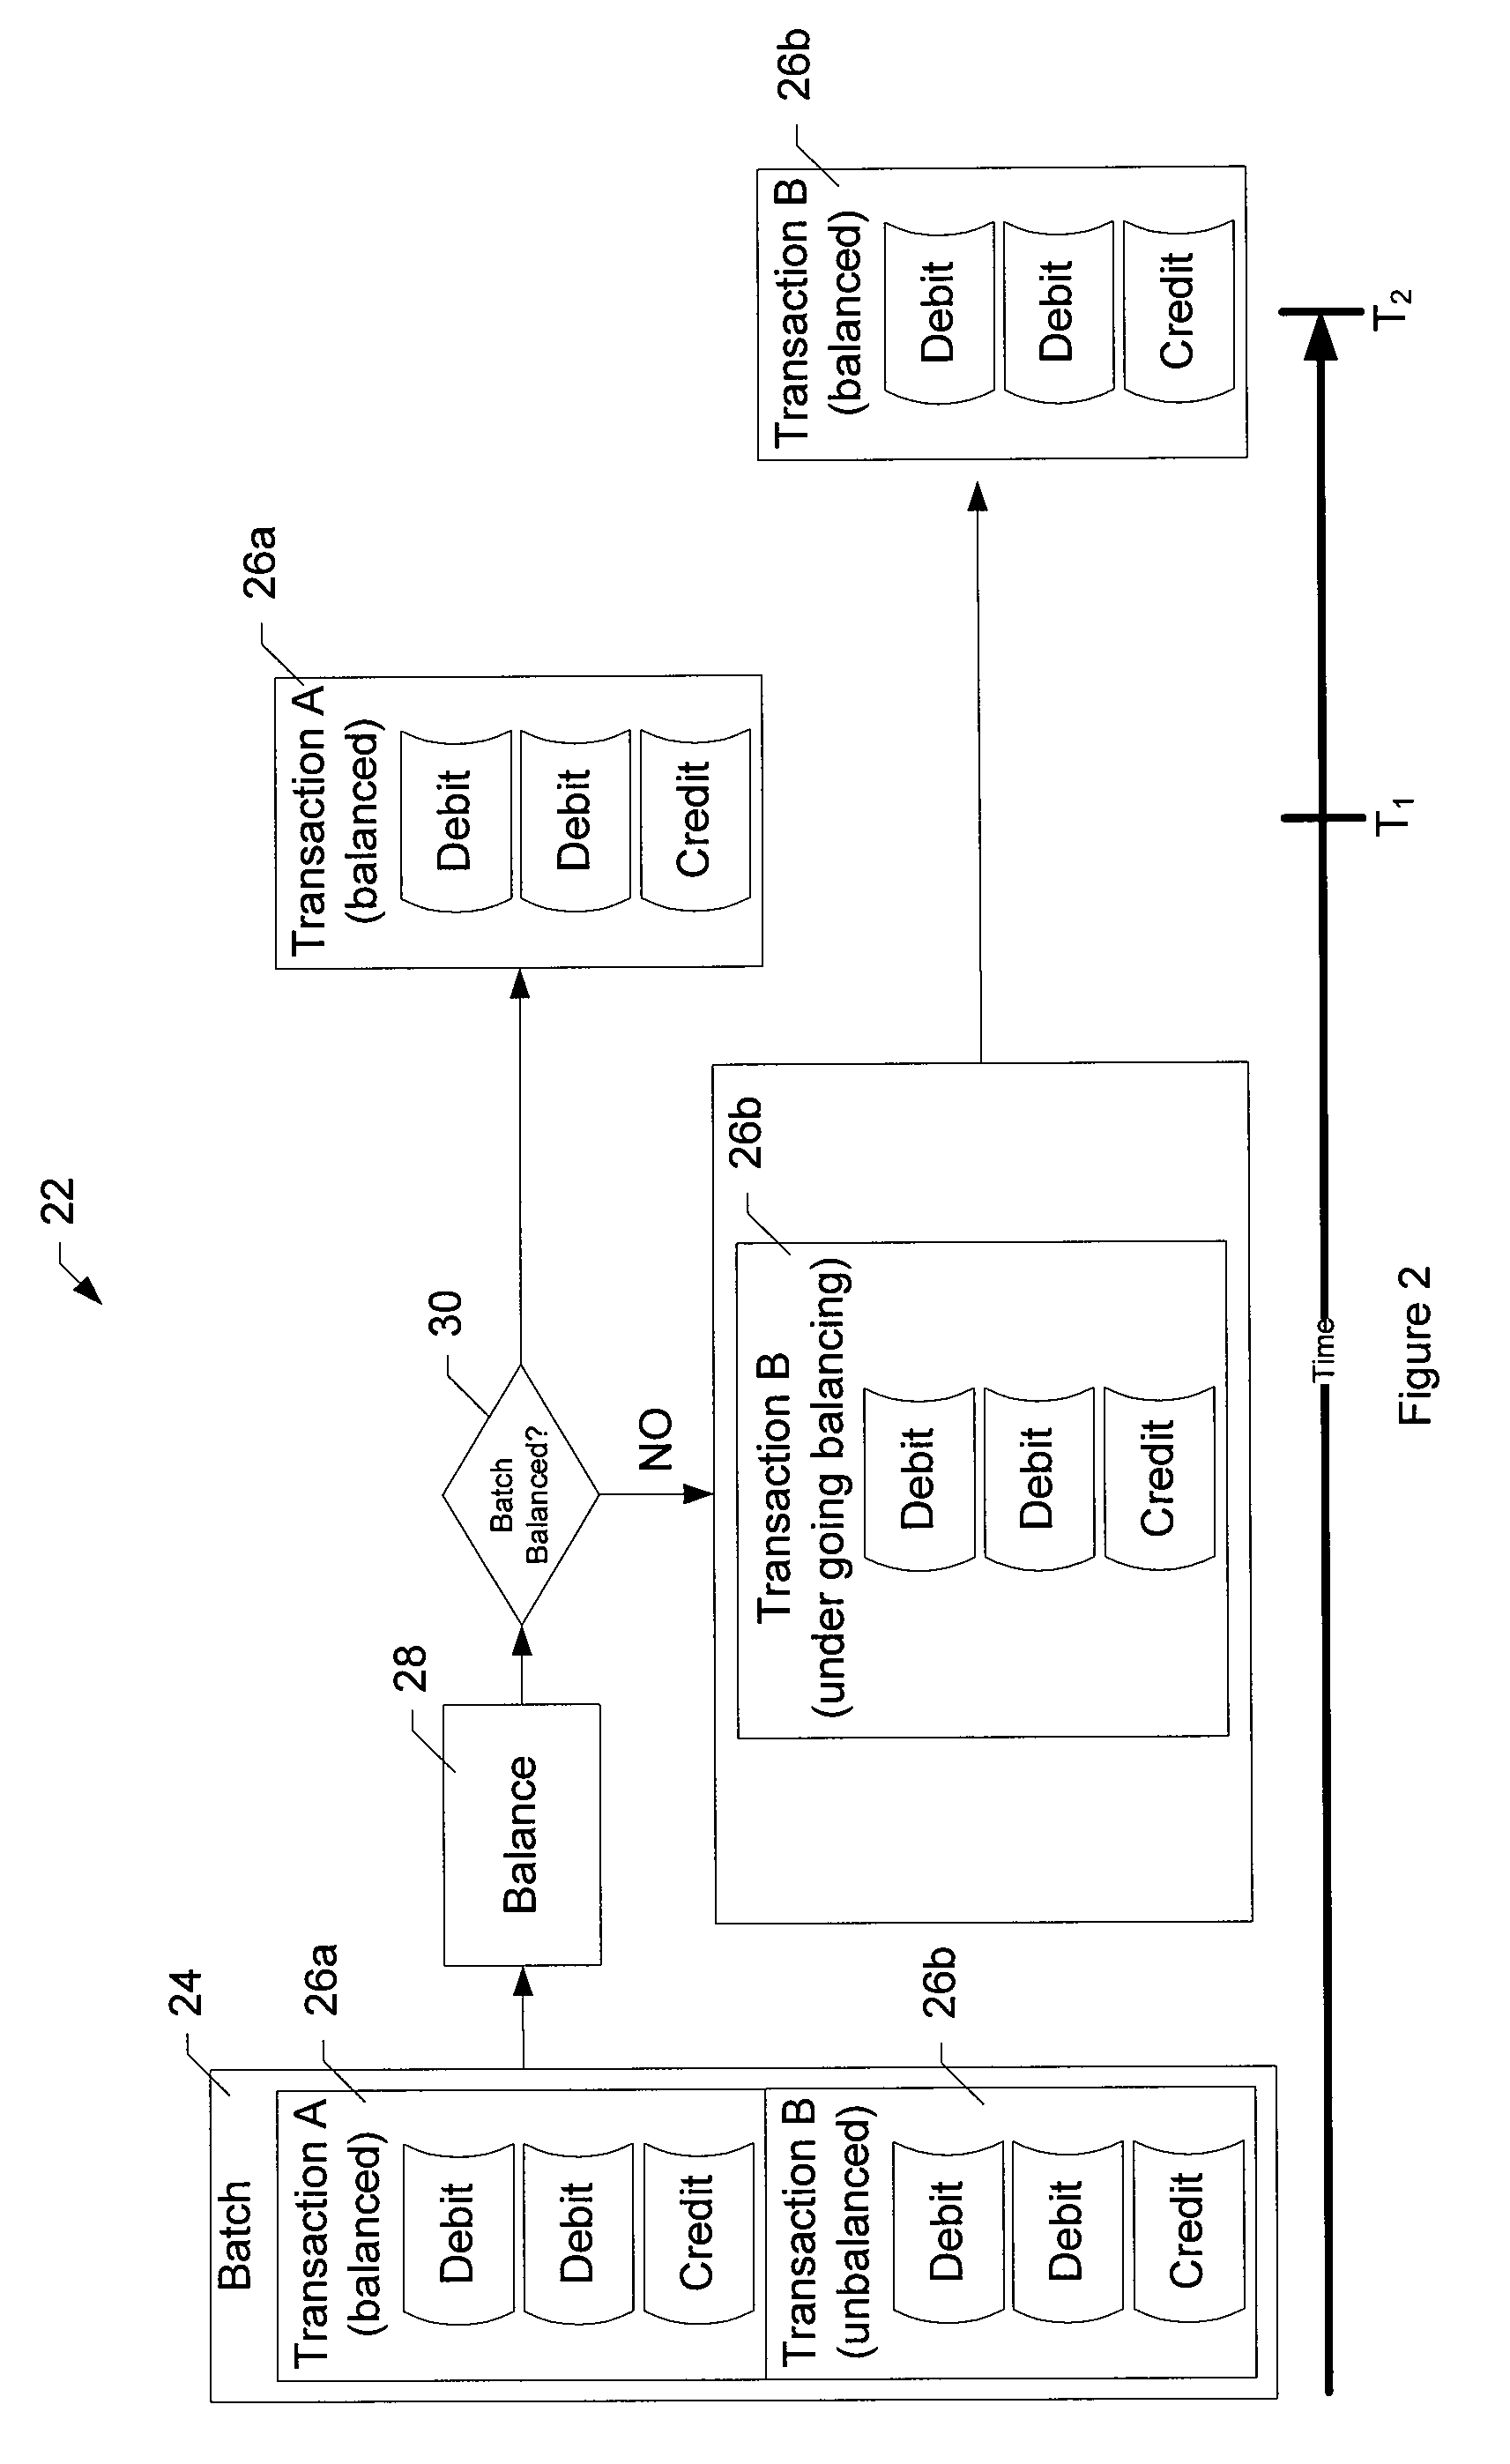 Systems, methods, and computer program products for performing item level transaction processing